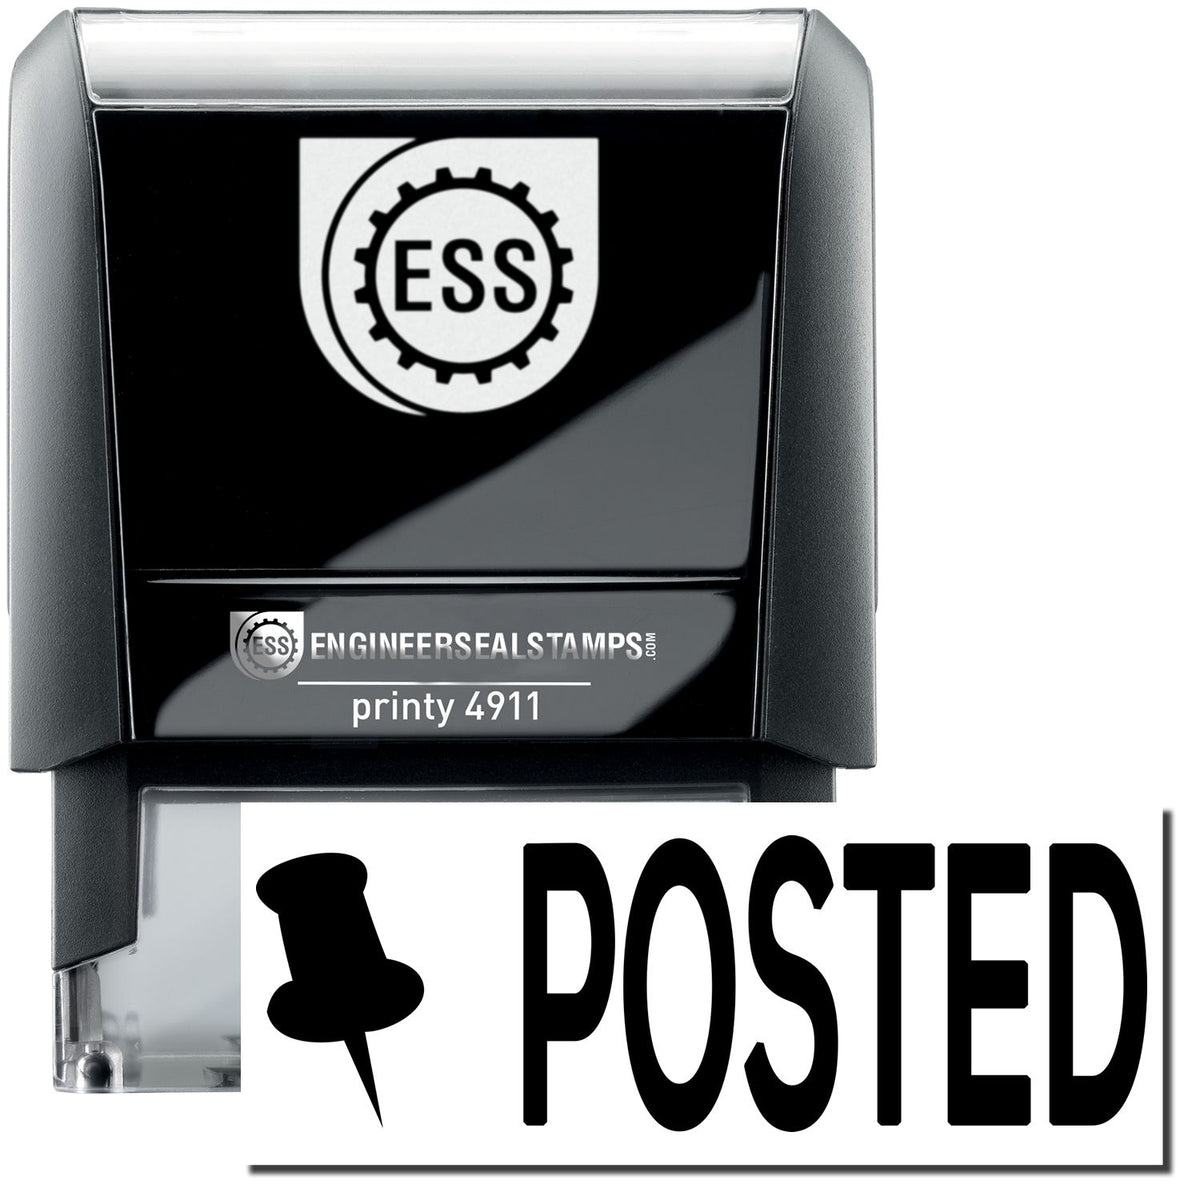 A self-inking stamp with a stamped image showing how the text &quot;POSTED&quot; in bold font and a thumbtack image on the left is displayed after stamping.